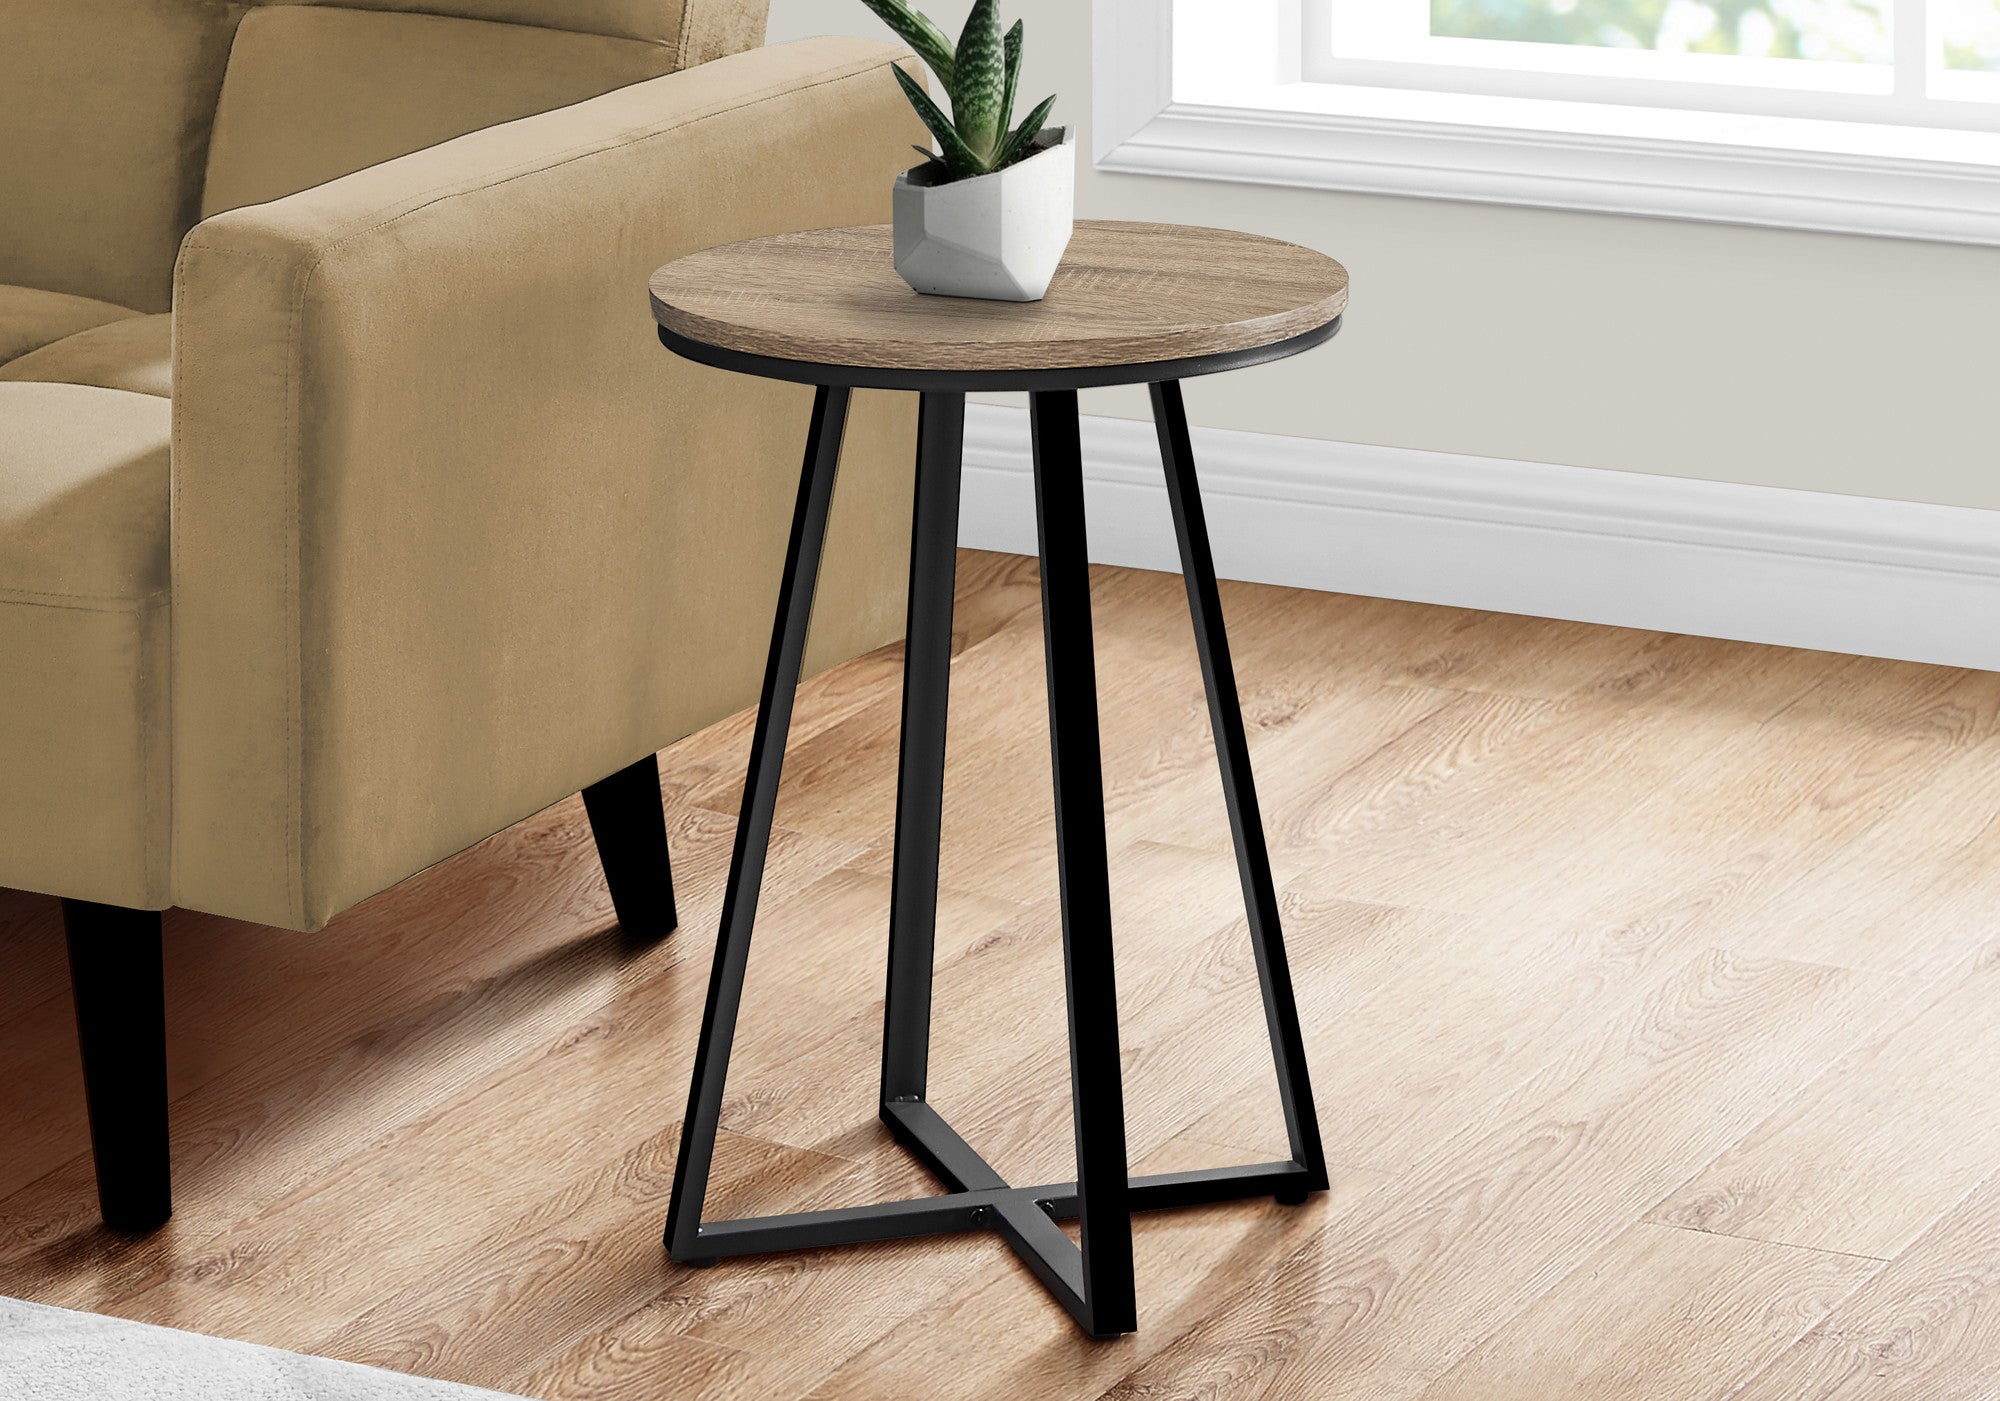 22" Black And Dark Taupe Round End Table